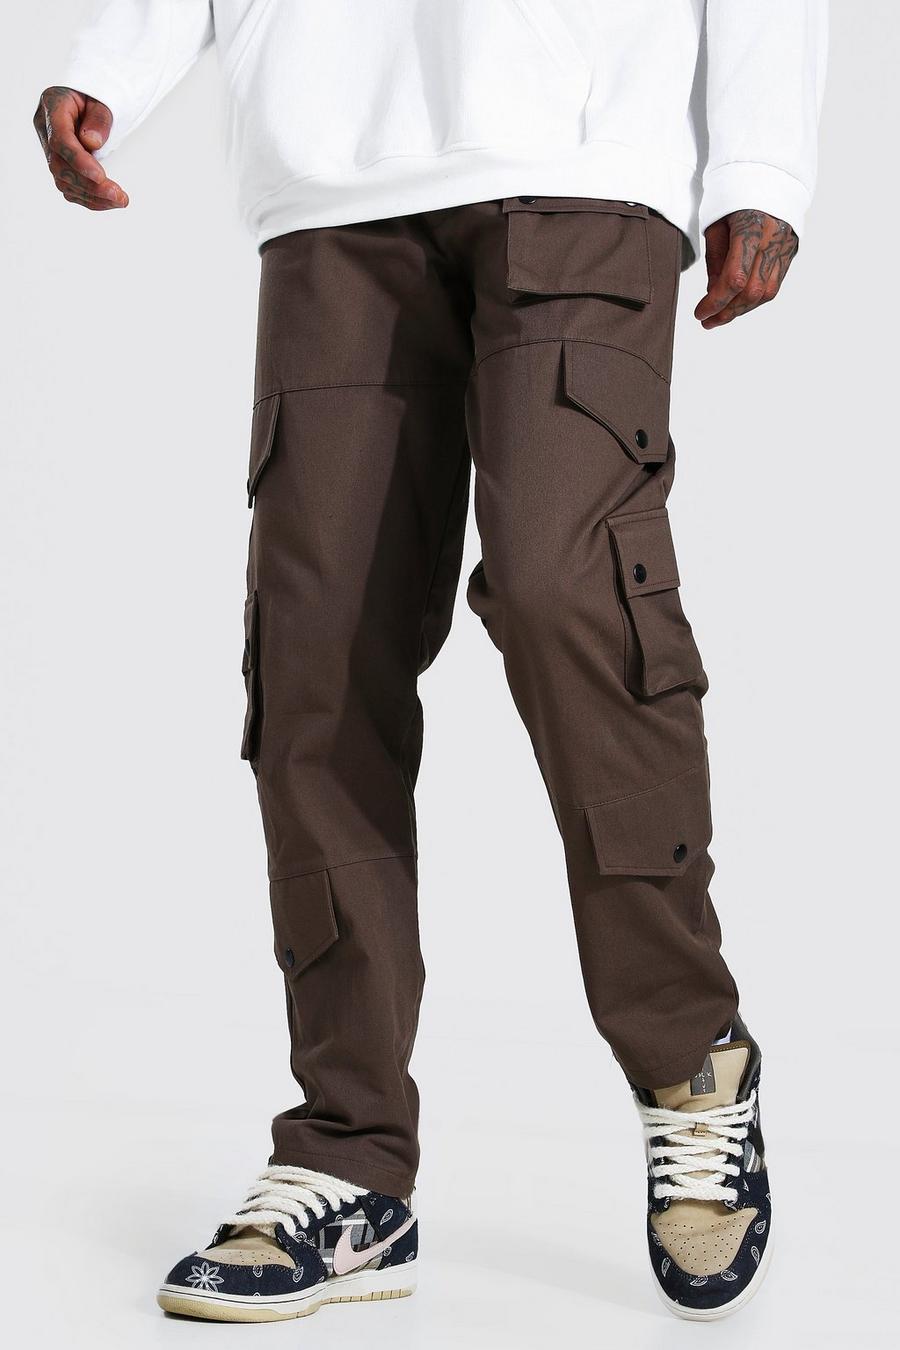 Cargo Pants Outfits Cheap Factory, Save 52% | jlcatj.gob.mx